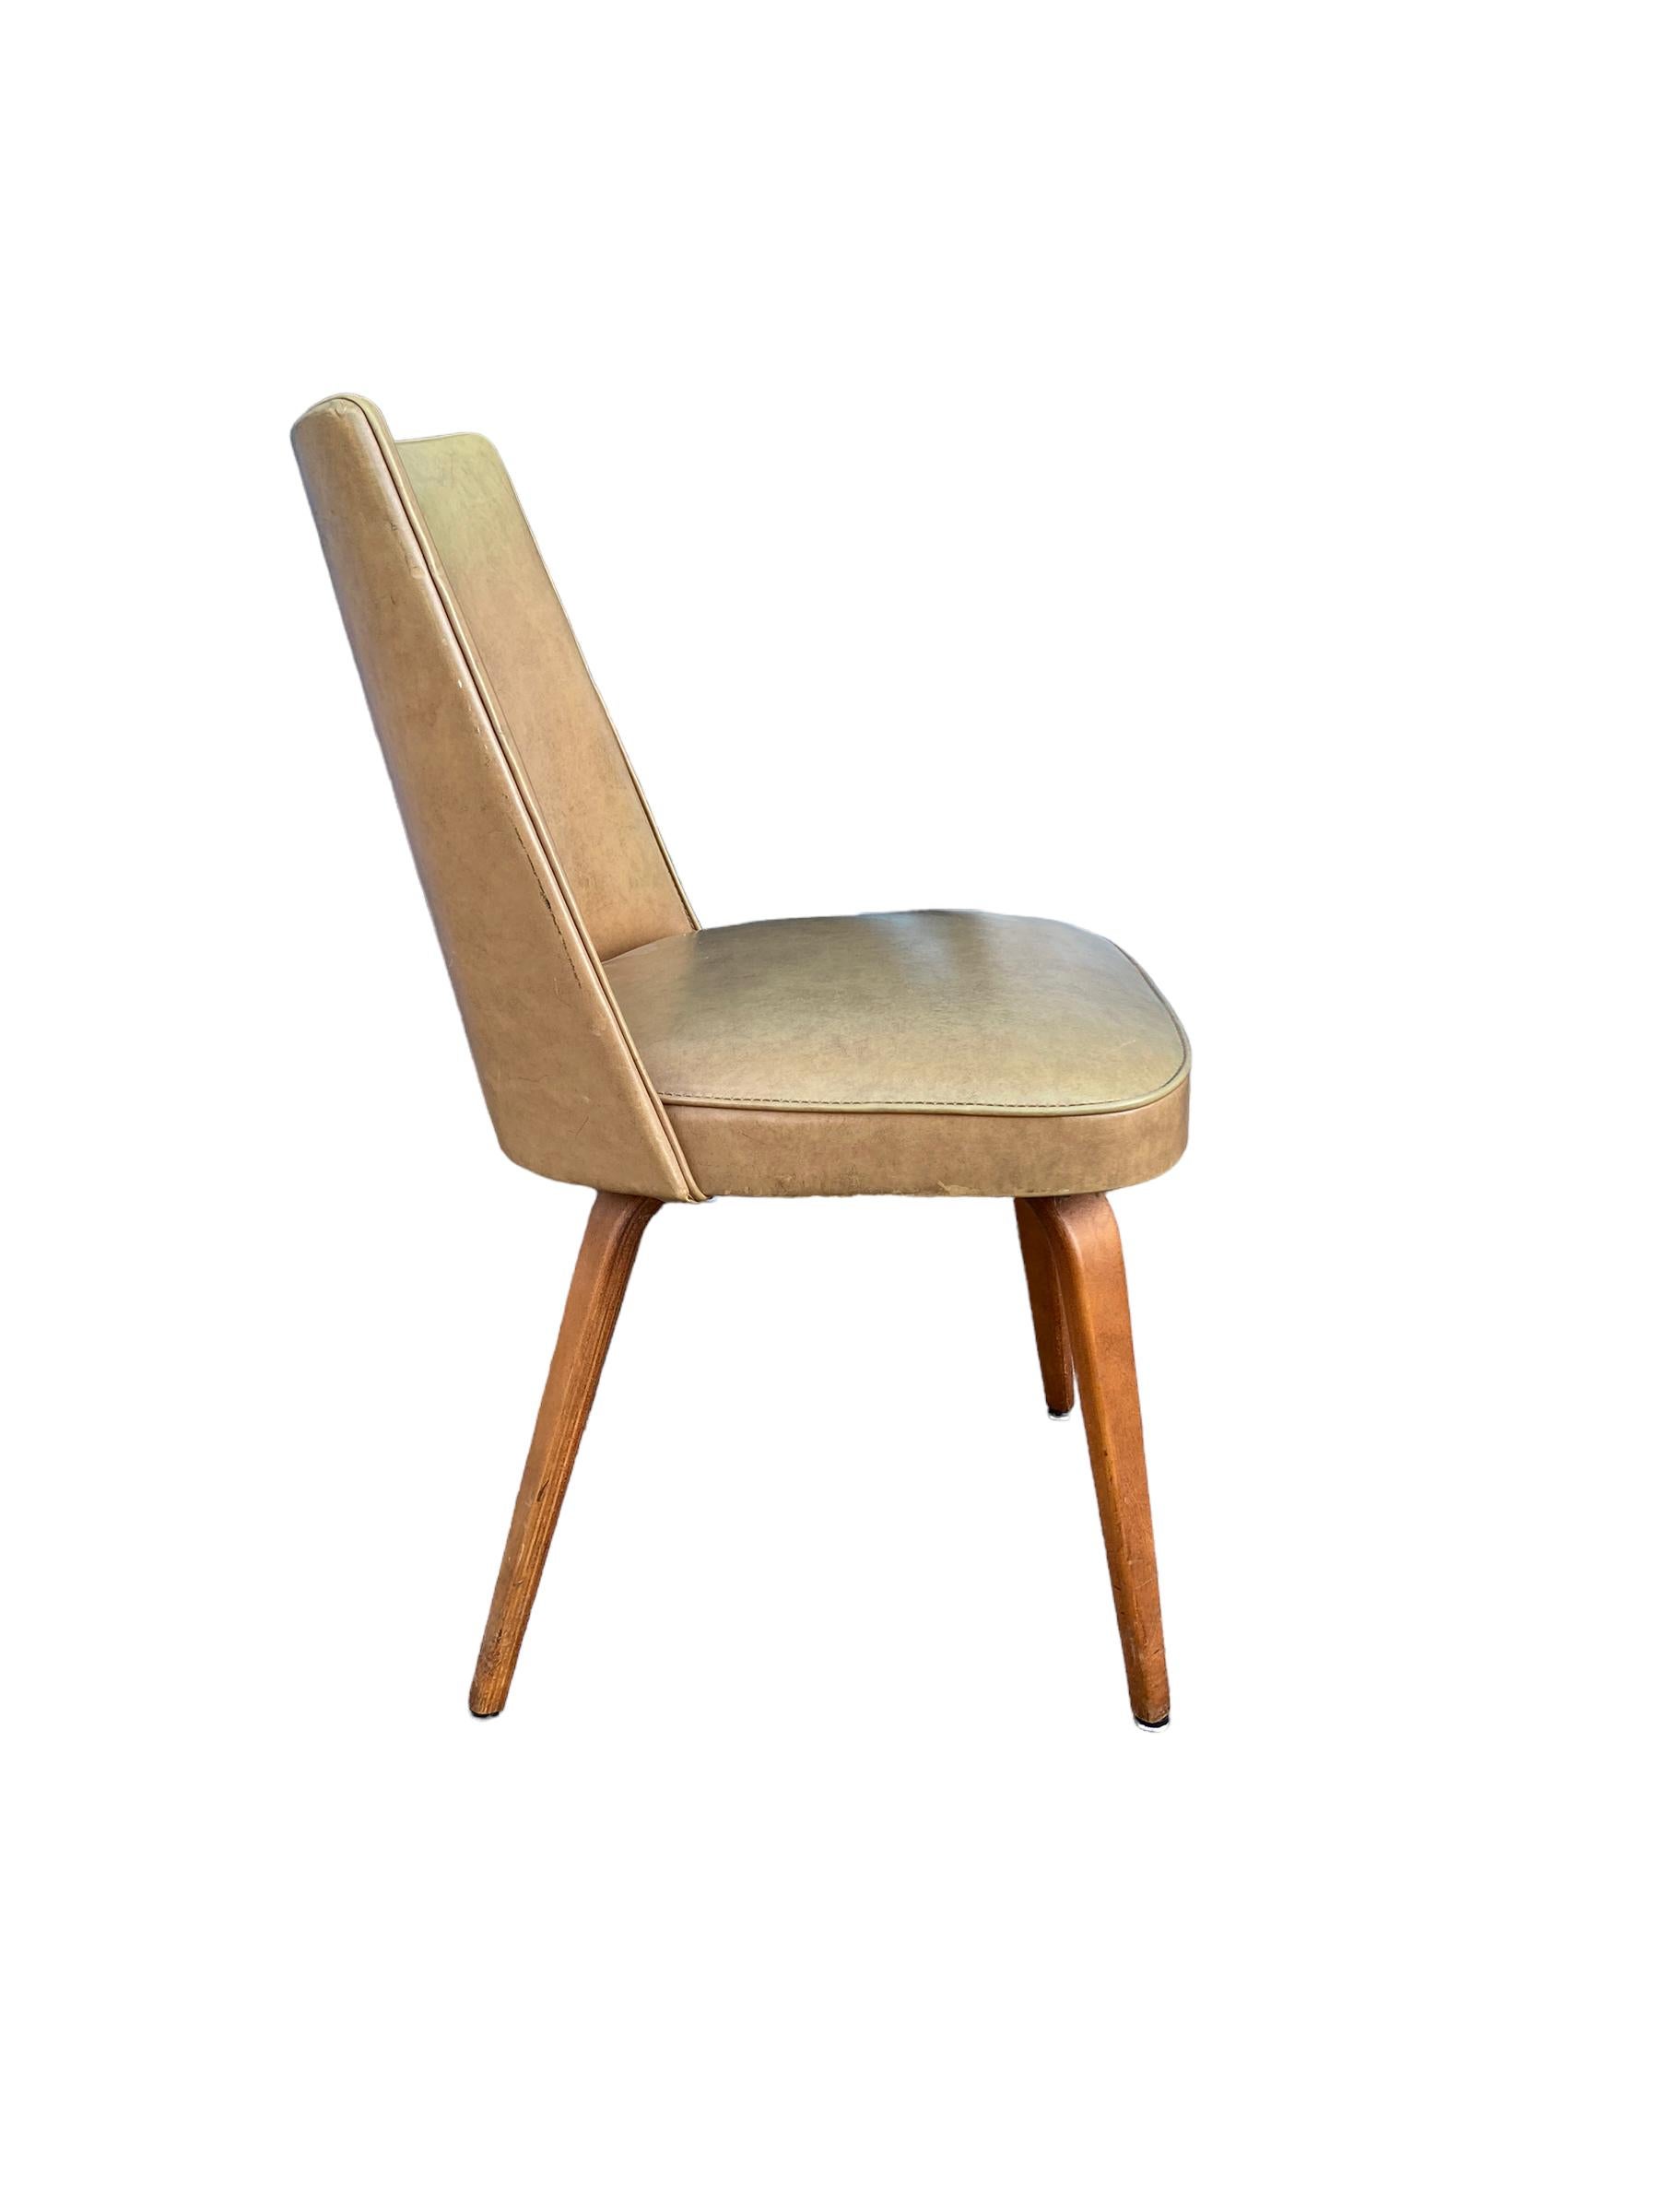 20th Century Upholstered Dining Chair by Thonet For Sale